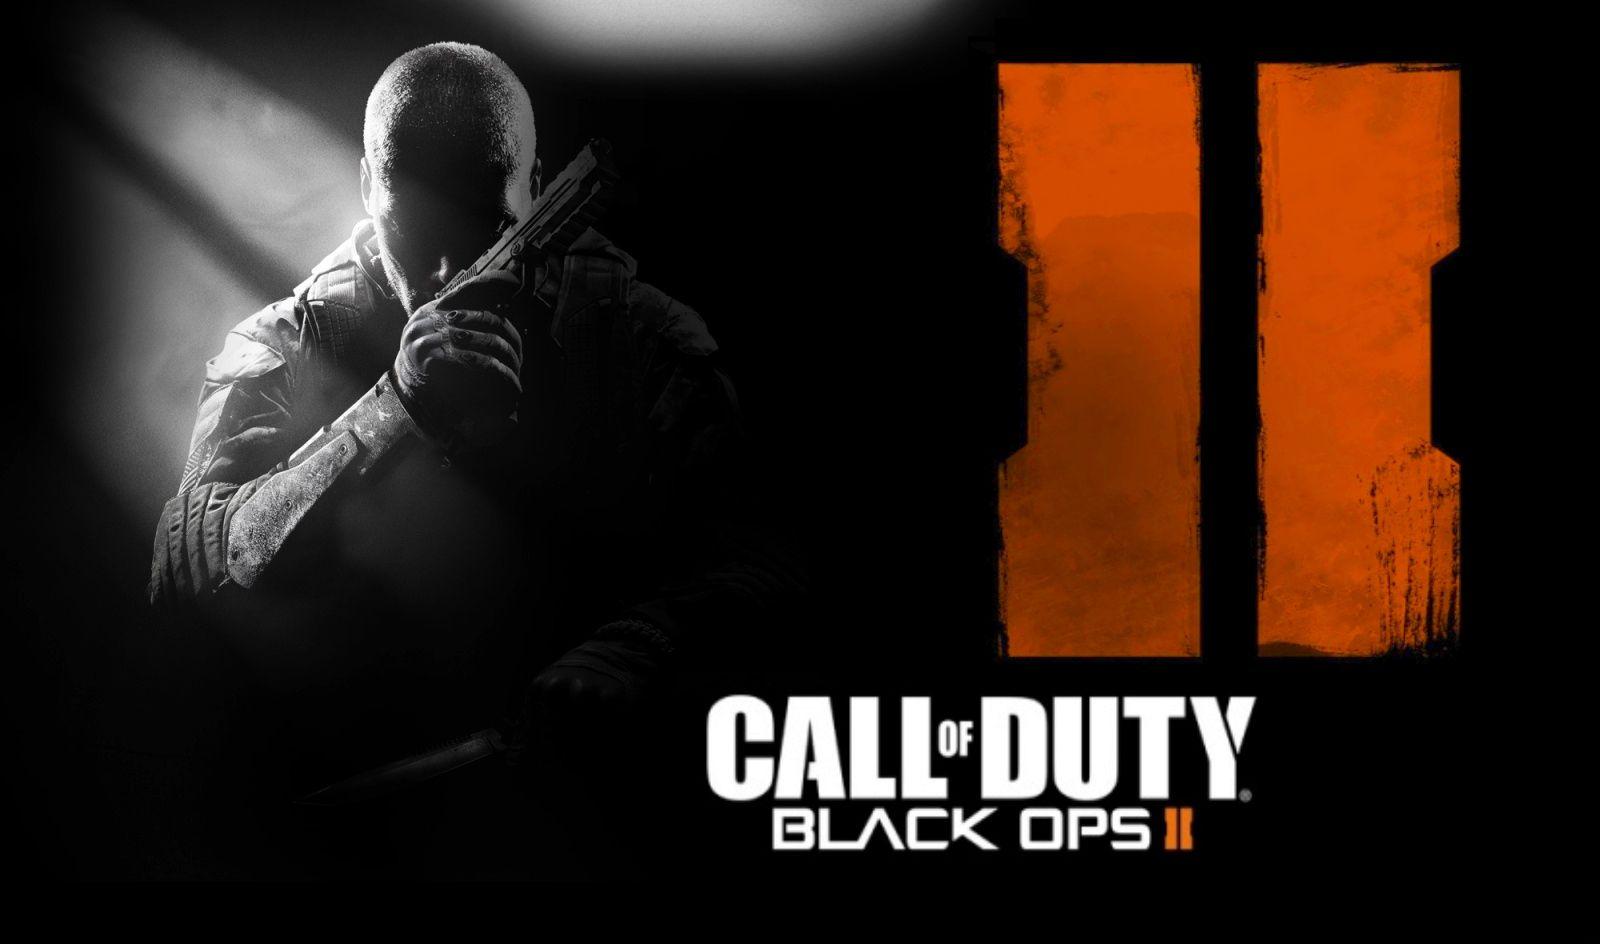 Collection of Black Ops 2 Wallpaper on HDWallpaper